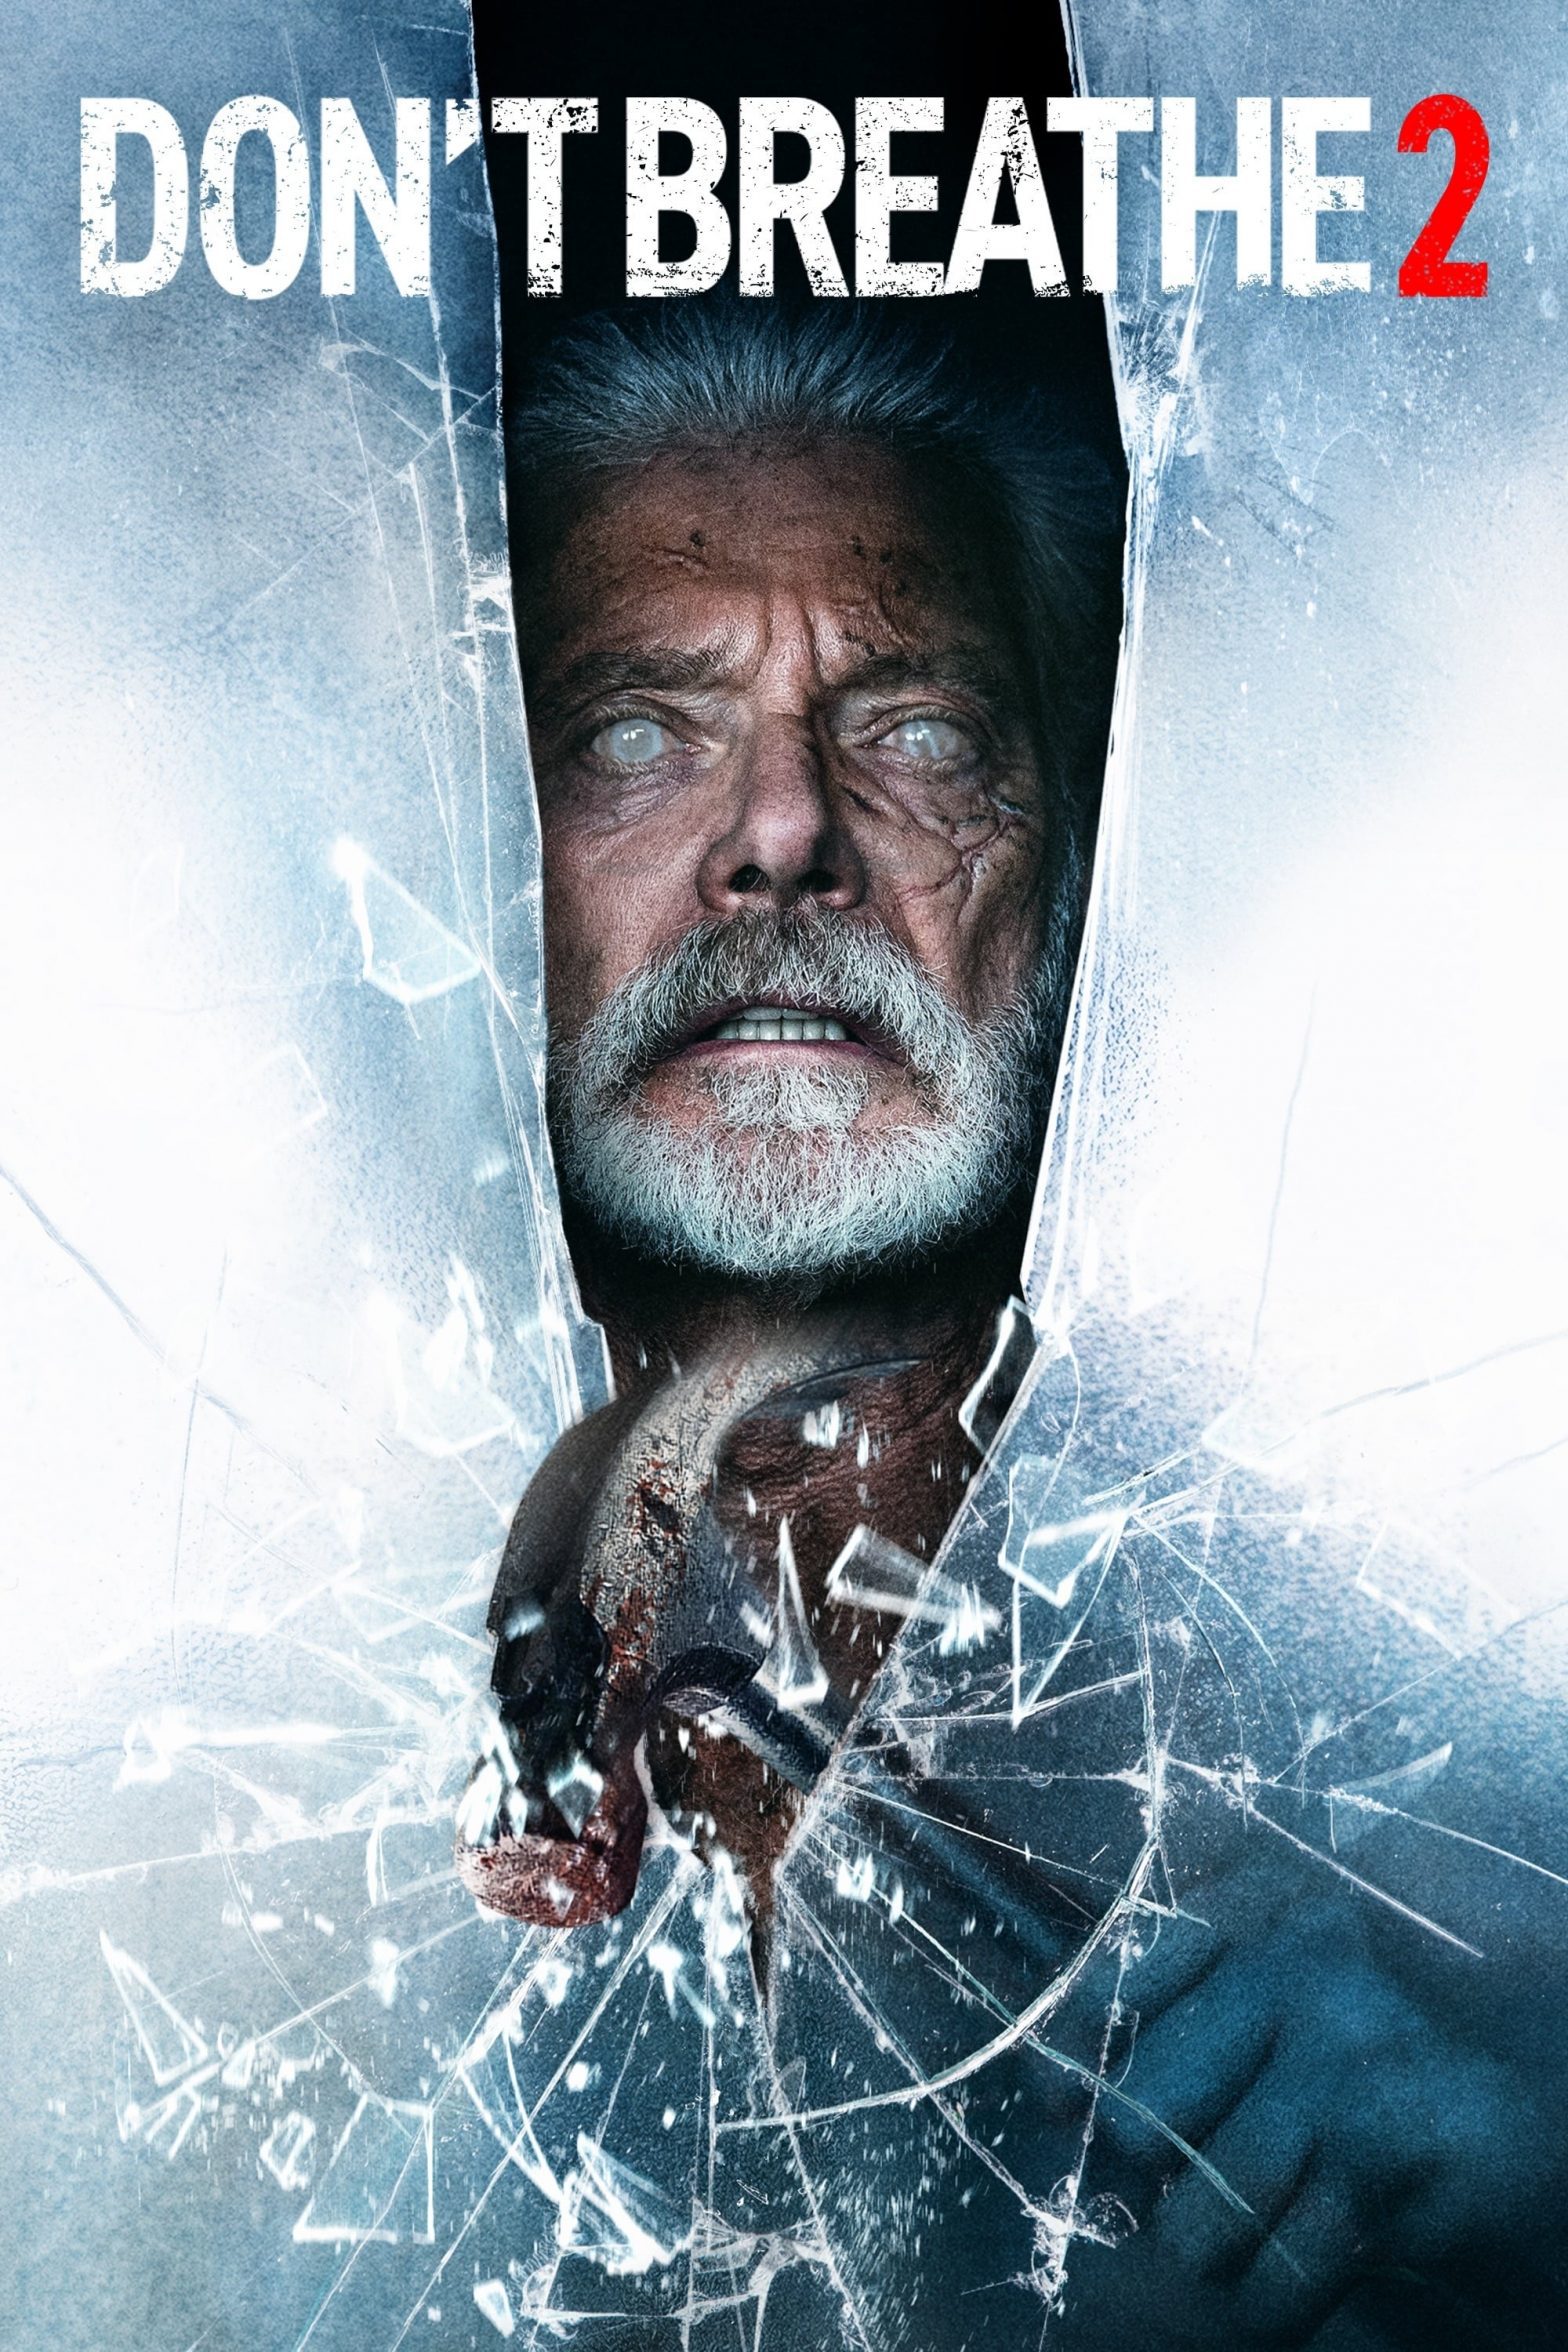 Poster for the movie "Don't Breathe 2"